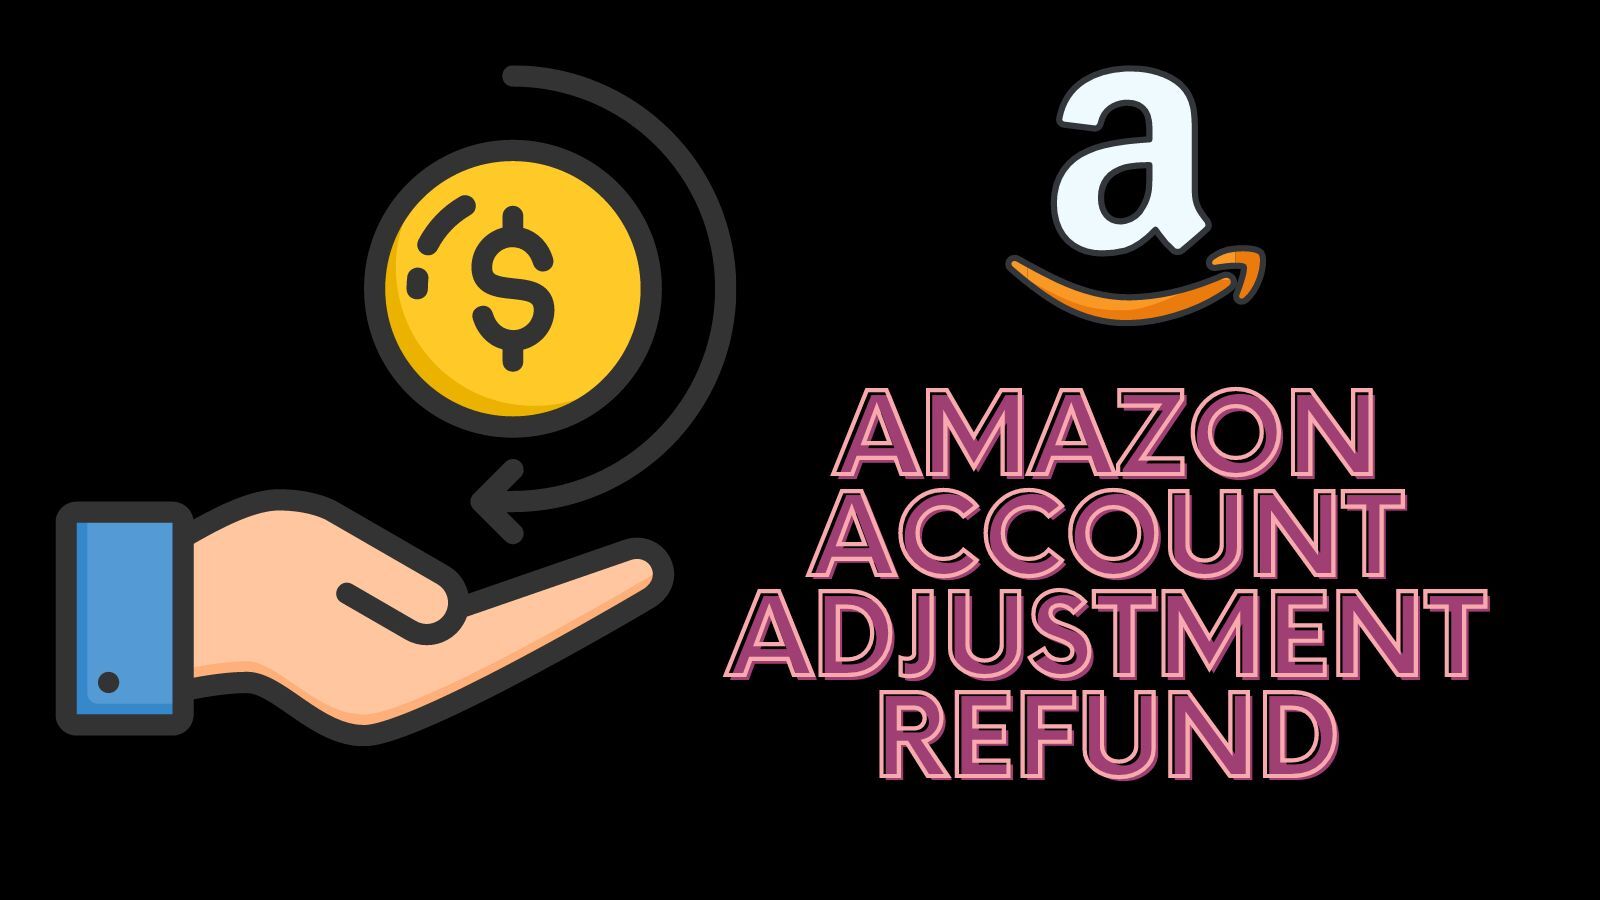 Amazon Account Adjustment Refund (Things You Need to Know!)